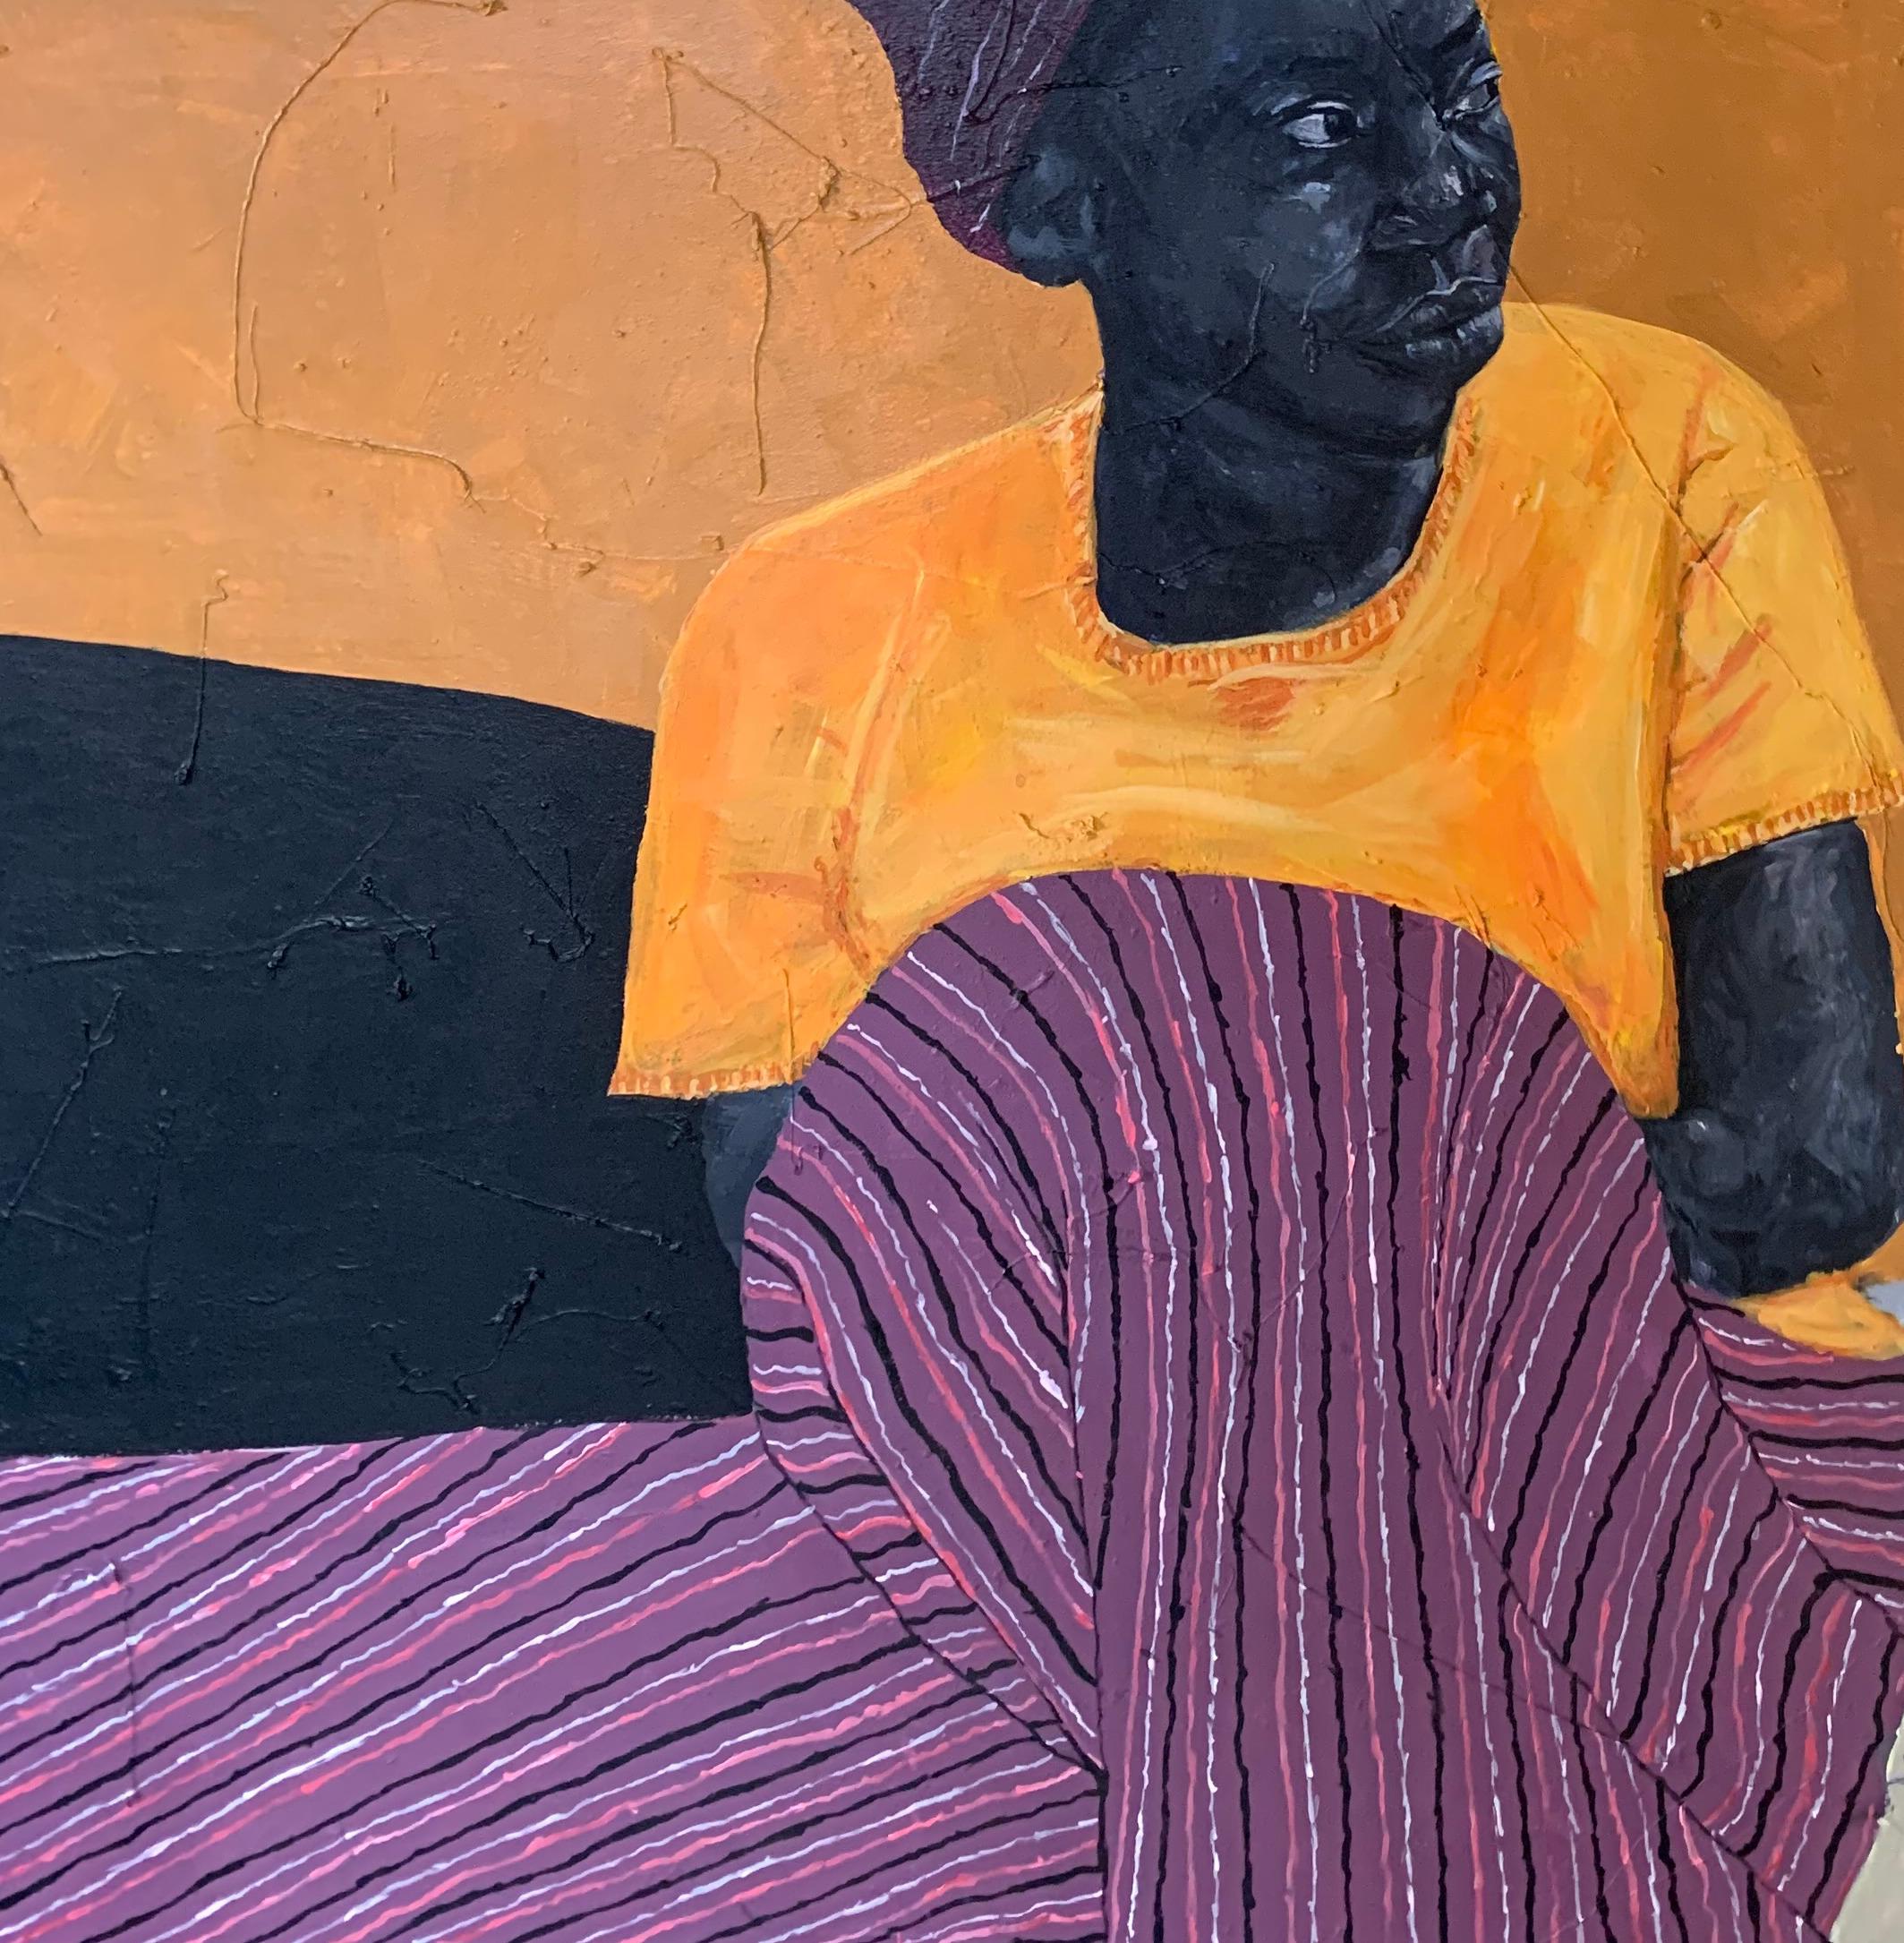 Waiting - Contemporary Painting by Oniosun Victoria Erioluwa